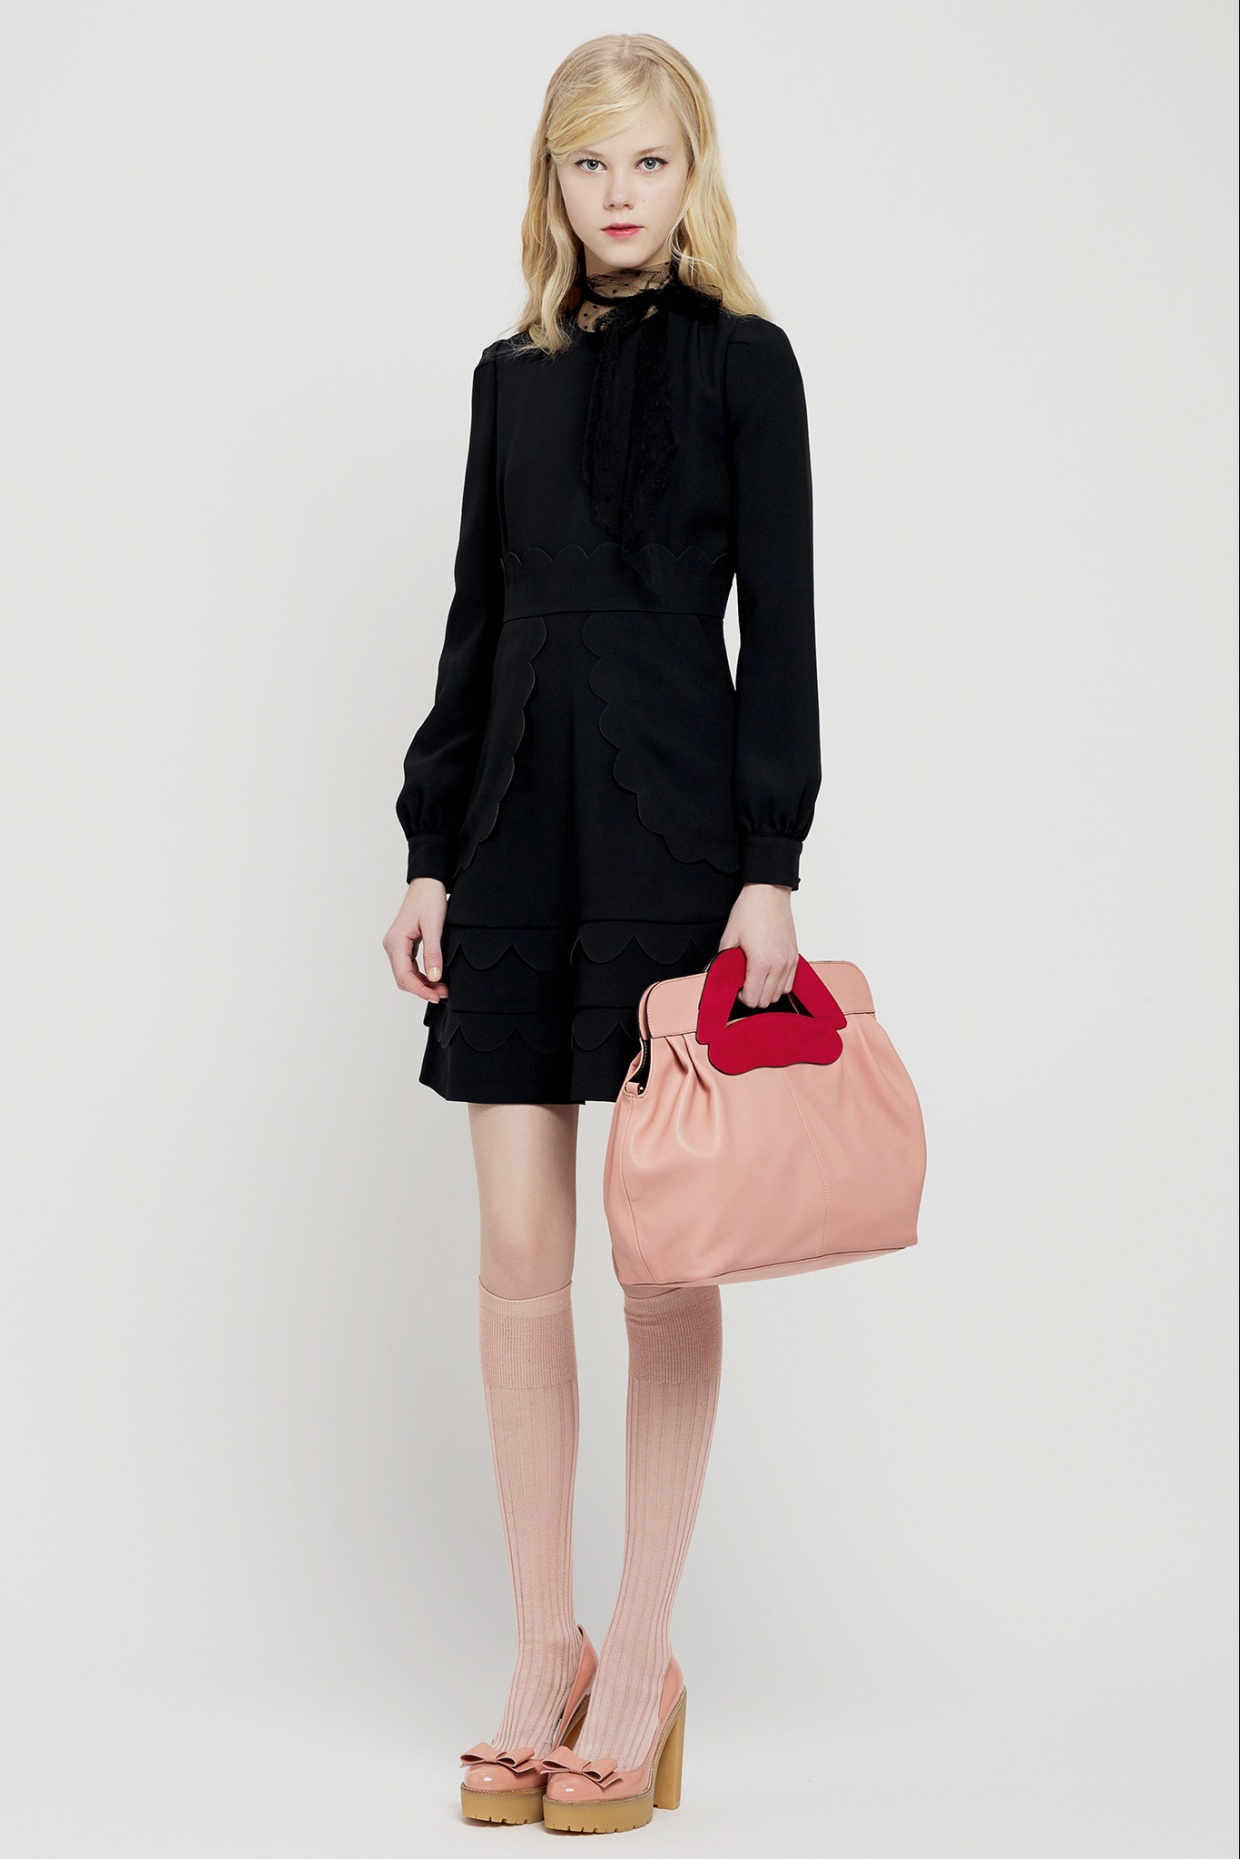 Red Valentino Pre-Fall 2015 – okay andie